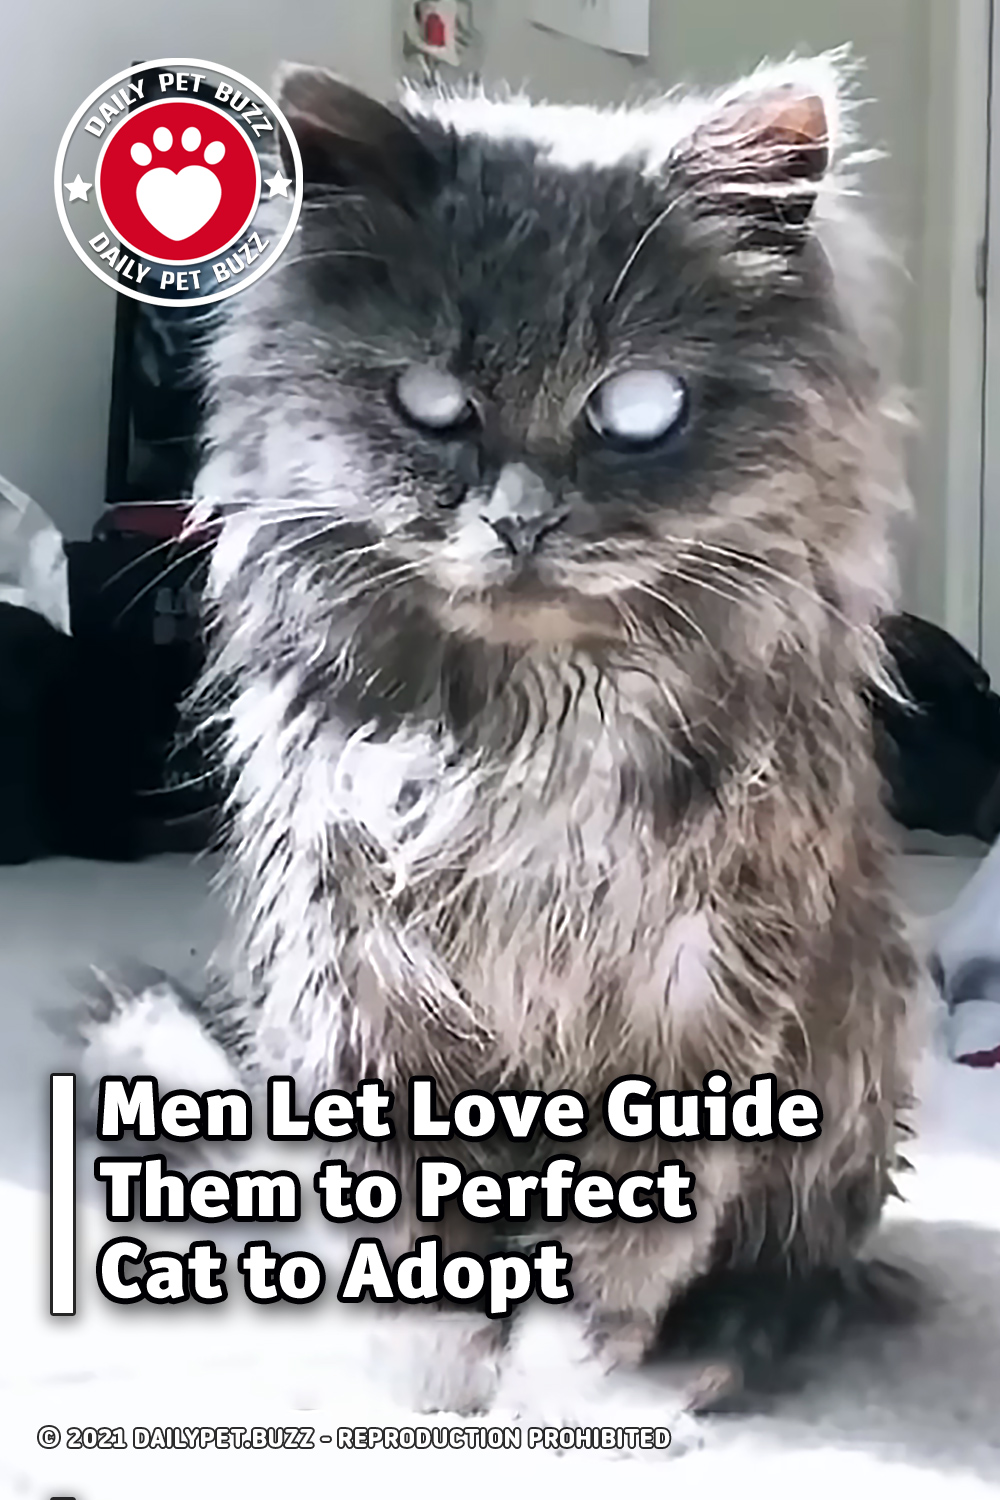 Men Let Love Guide Them to Perfect Cat to Adopt